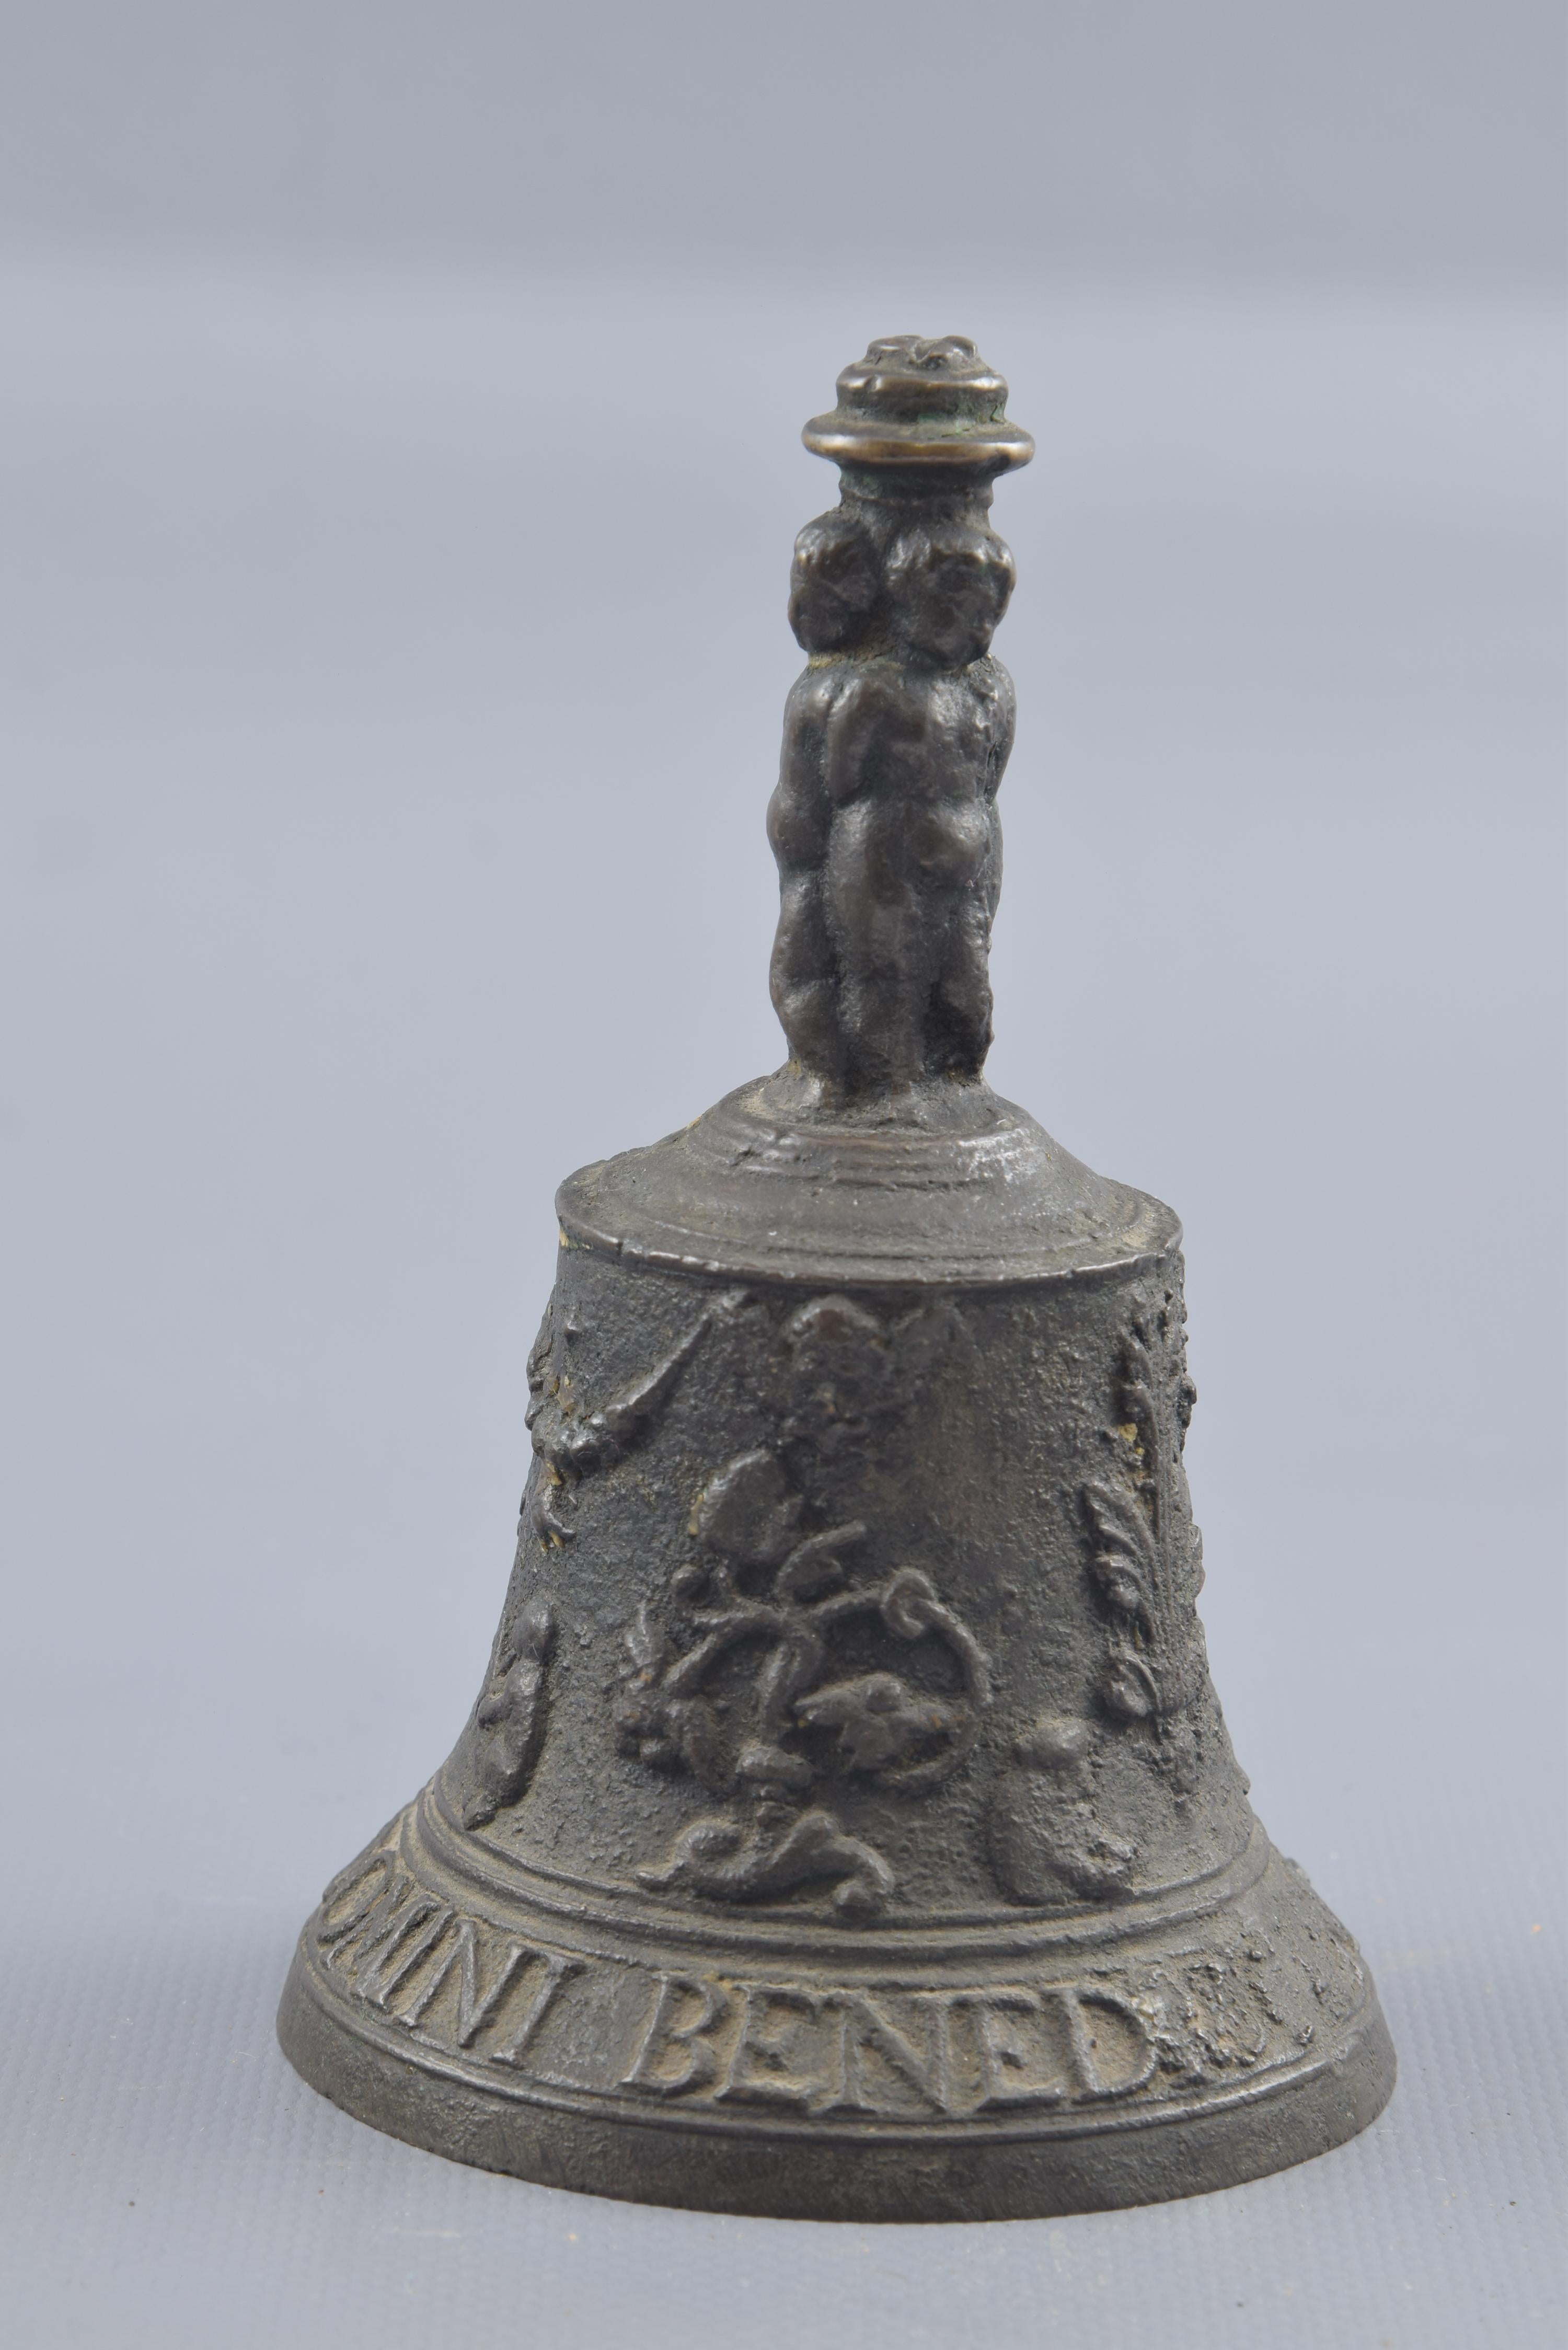 Flemish hand bell. Bronze, 16th century
Bell with ball clapper made of bronze that presents a decoration in relief to the outside (figures on the handle; a figurative composition under wreaths on the body, with small figures and a large one playing